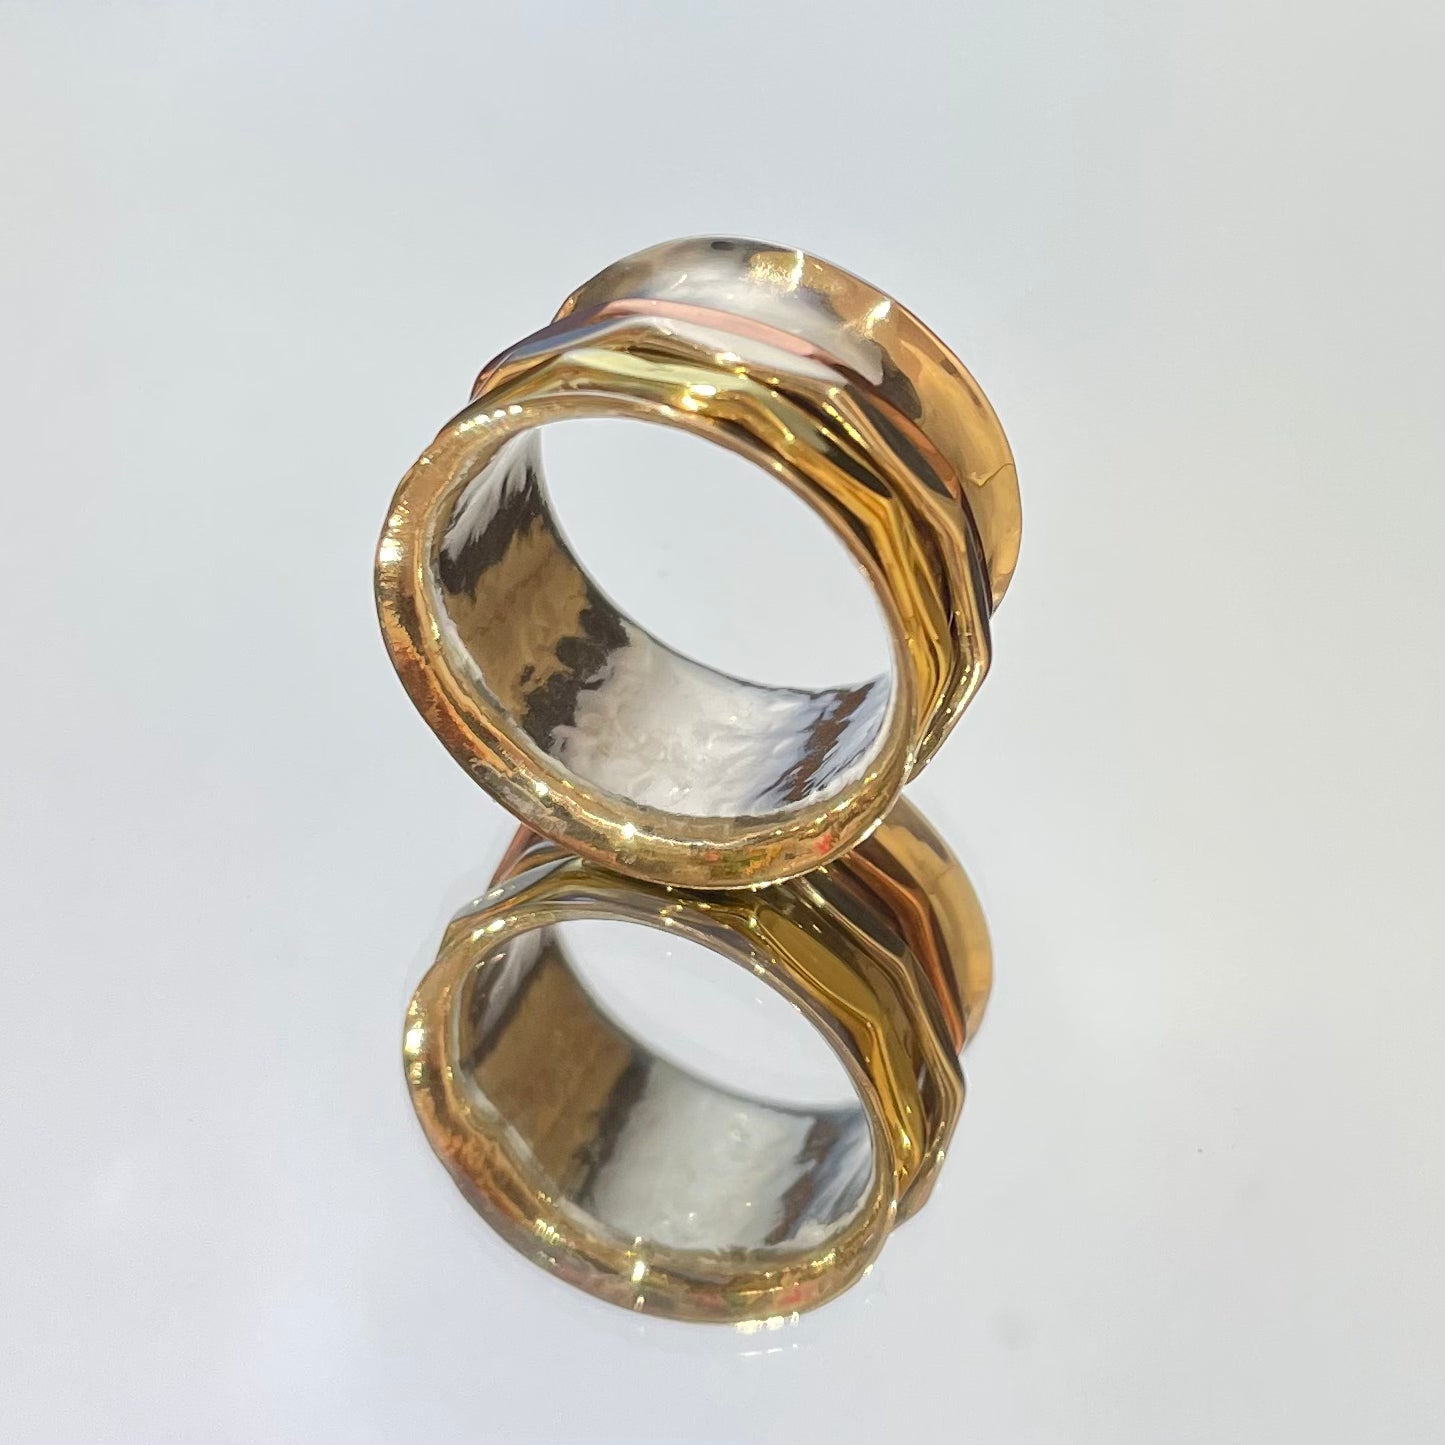 The Tara Mixed Metal Spinning Silver Ring is a true statement piece, boasting a 13mm-wide band for a bold yet comfortable fit. Its intricate design features three inner bands crafted from brass, copper, and silver, each measuring 2mm wide. This ring is a stunning fusion of style and craftsmanship, sure to turn heads wherever you go.